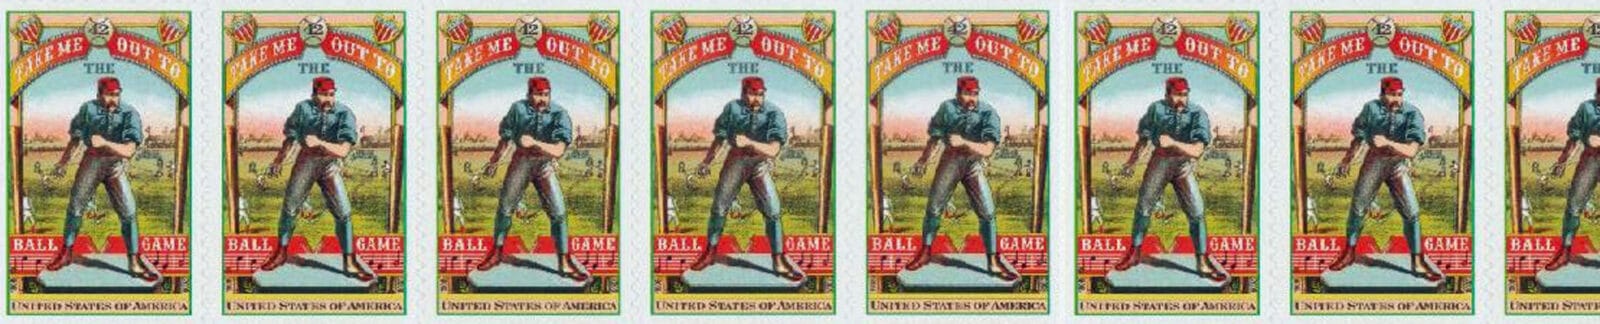 Take Me Out To The Ballgame U.S. Postage Stamps – header